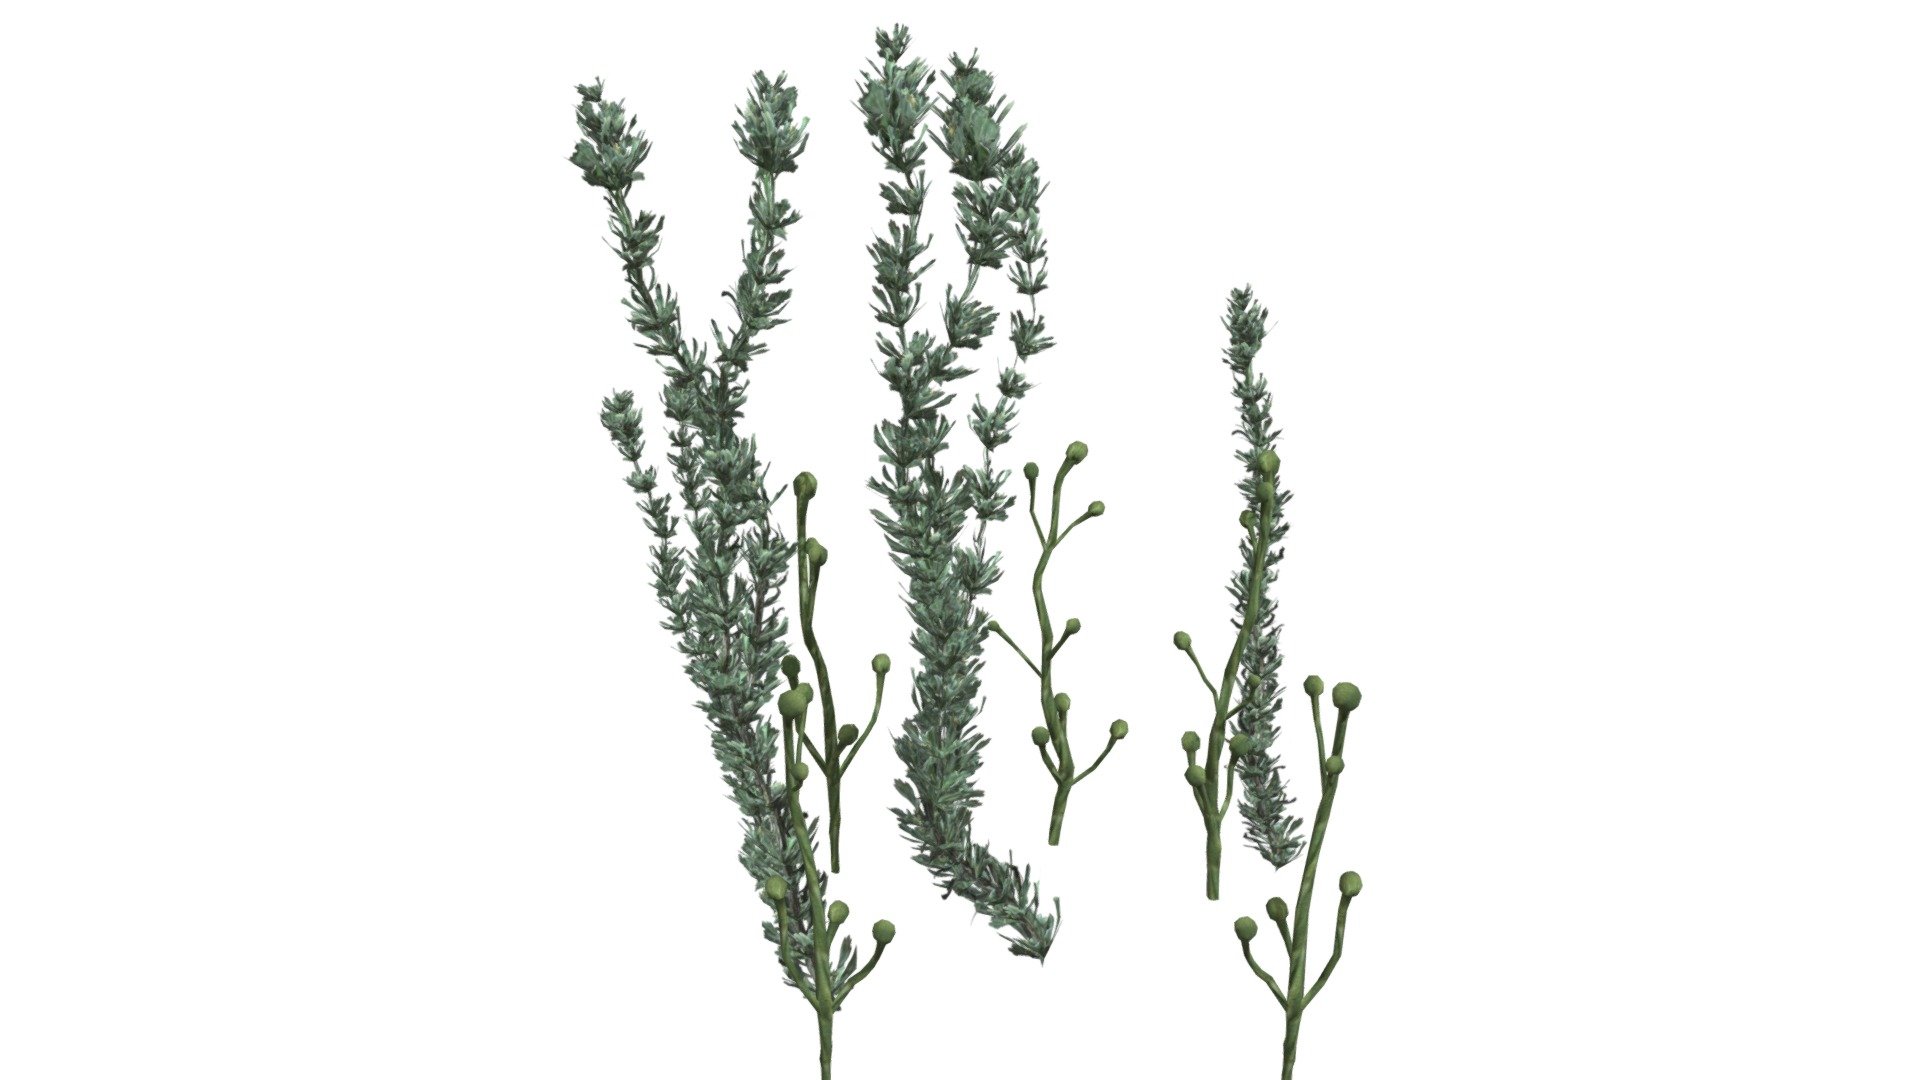 This 3D model of the Pond Weed Plant is a highly detailed and photorealistic option suitable for architectural, landscaping, and video game projects. The model is designed with carefully crafted textures that mimic the natural beauty of a real Pond Weed Plant. Its versatility allows it to bring a touch of realism to any project, whether it’s a small architectural rendering or a large-scale landscape design. Additionally, the model is optimized for performance and features efficient UV mapping. This photorealistic 3D model is the perfect solution for architects, landscapers, and game developers who want to enhance the visual experience of their project with a highly detailed, photorealistic Pond Weed Plant 3d model